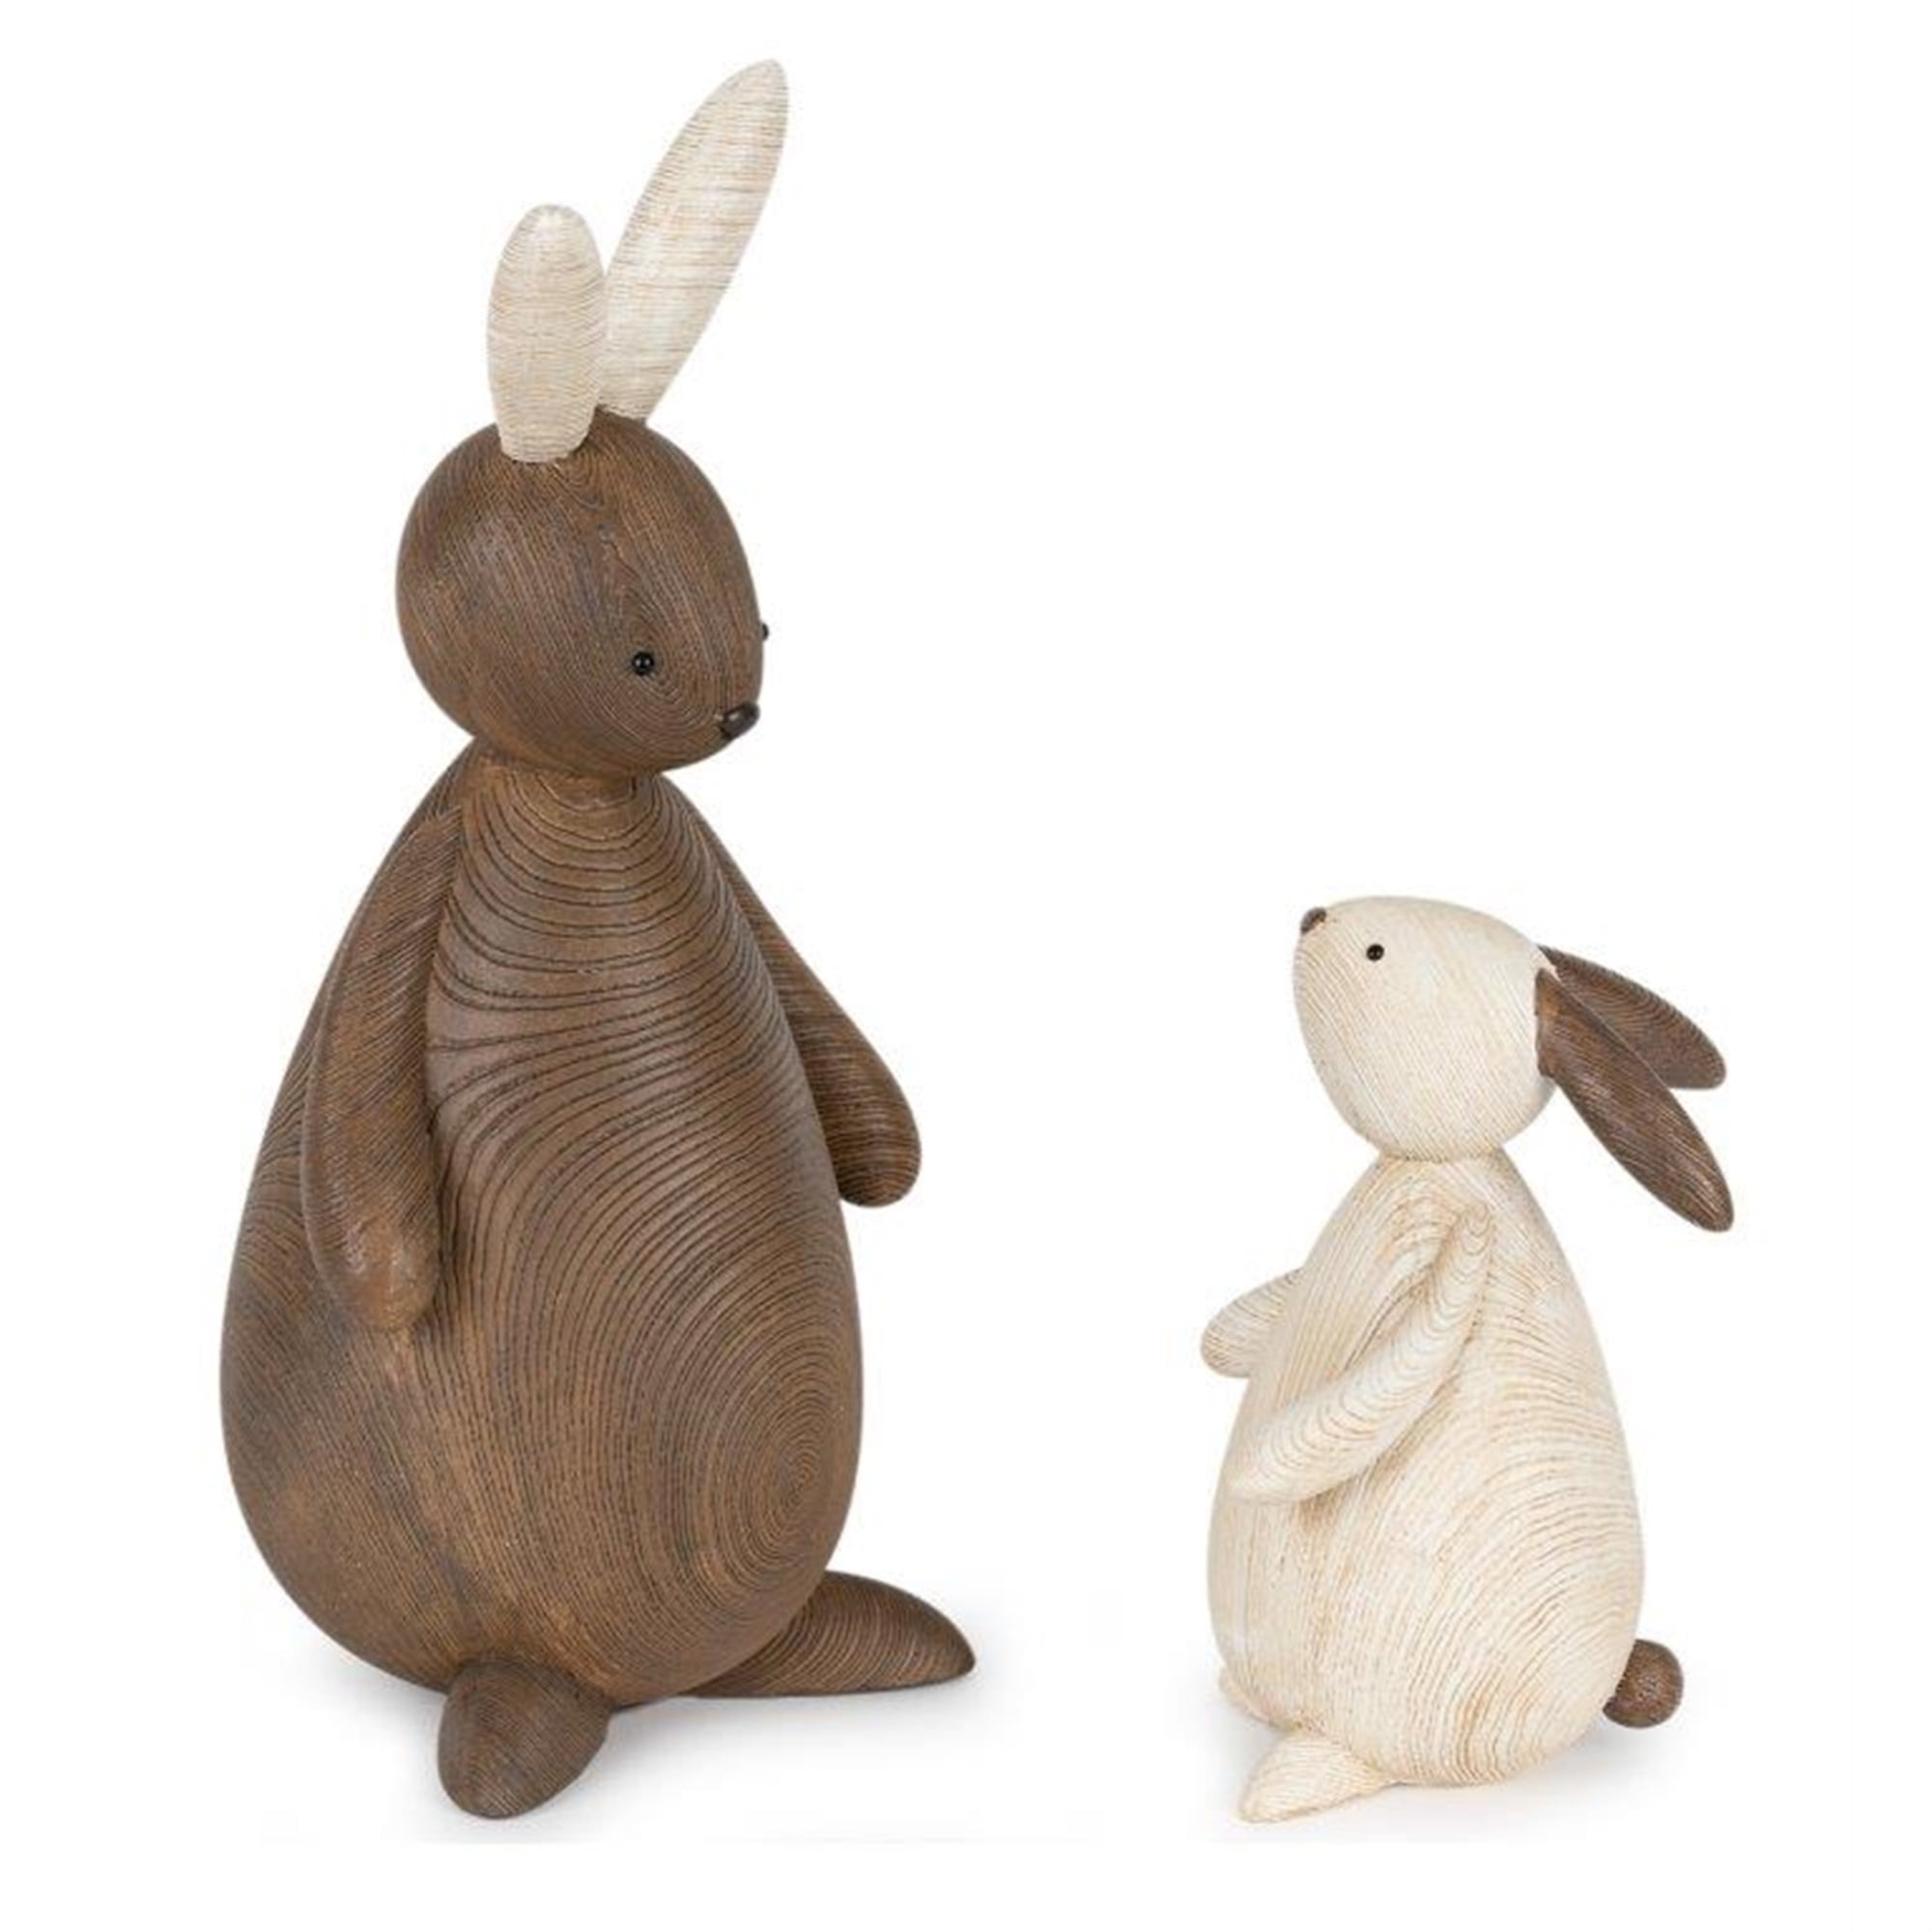 Bunny (Set of 2) 5.75"H, 10.5"H Resin